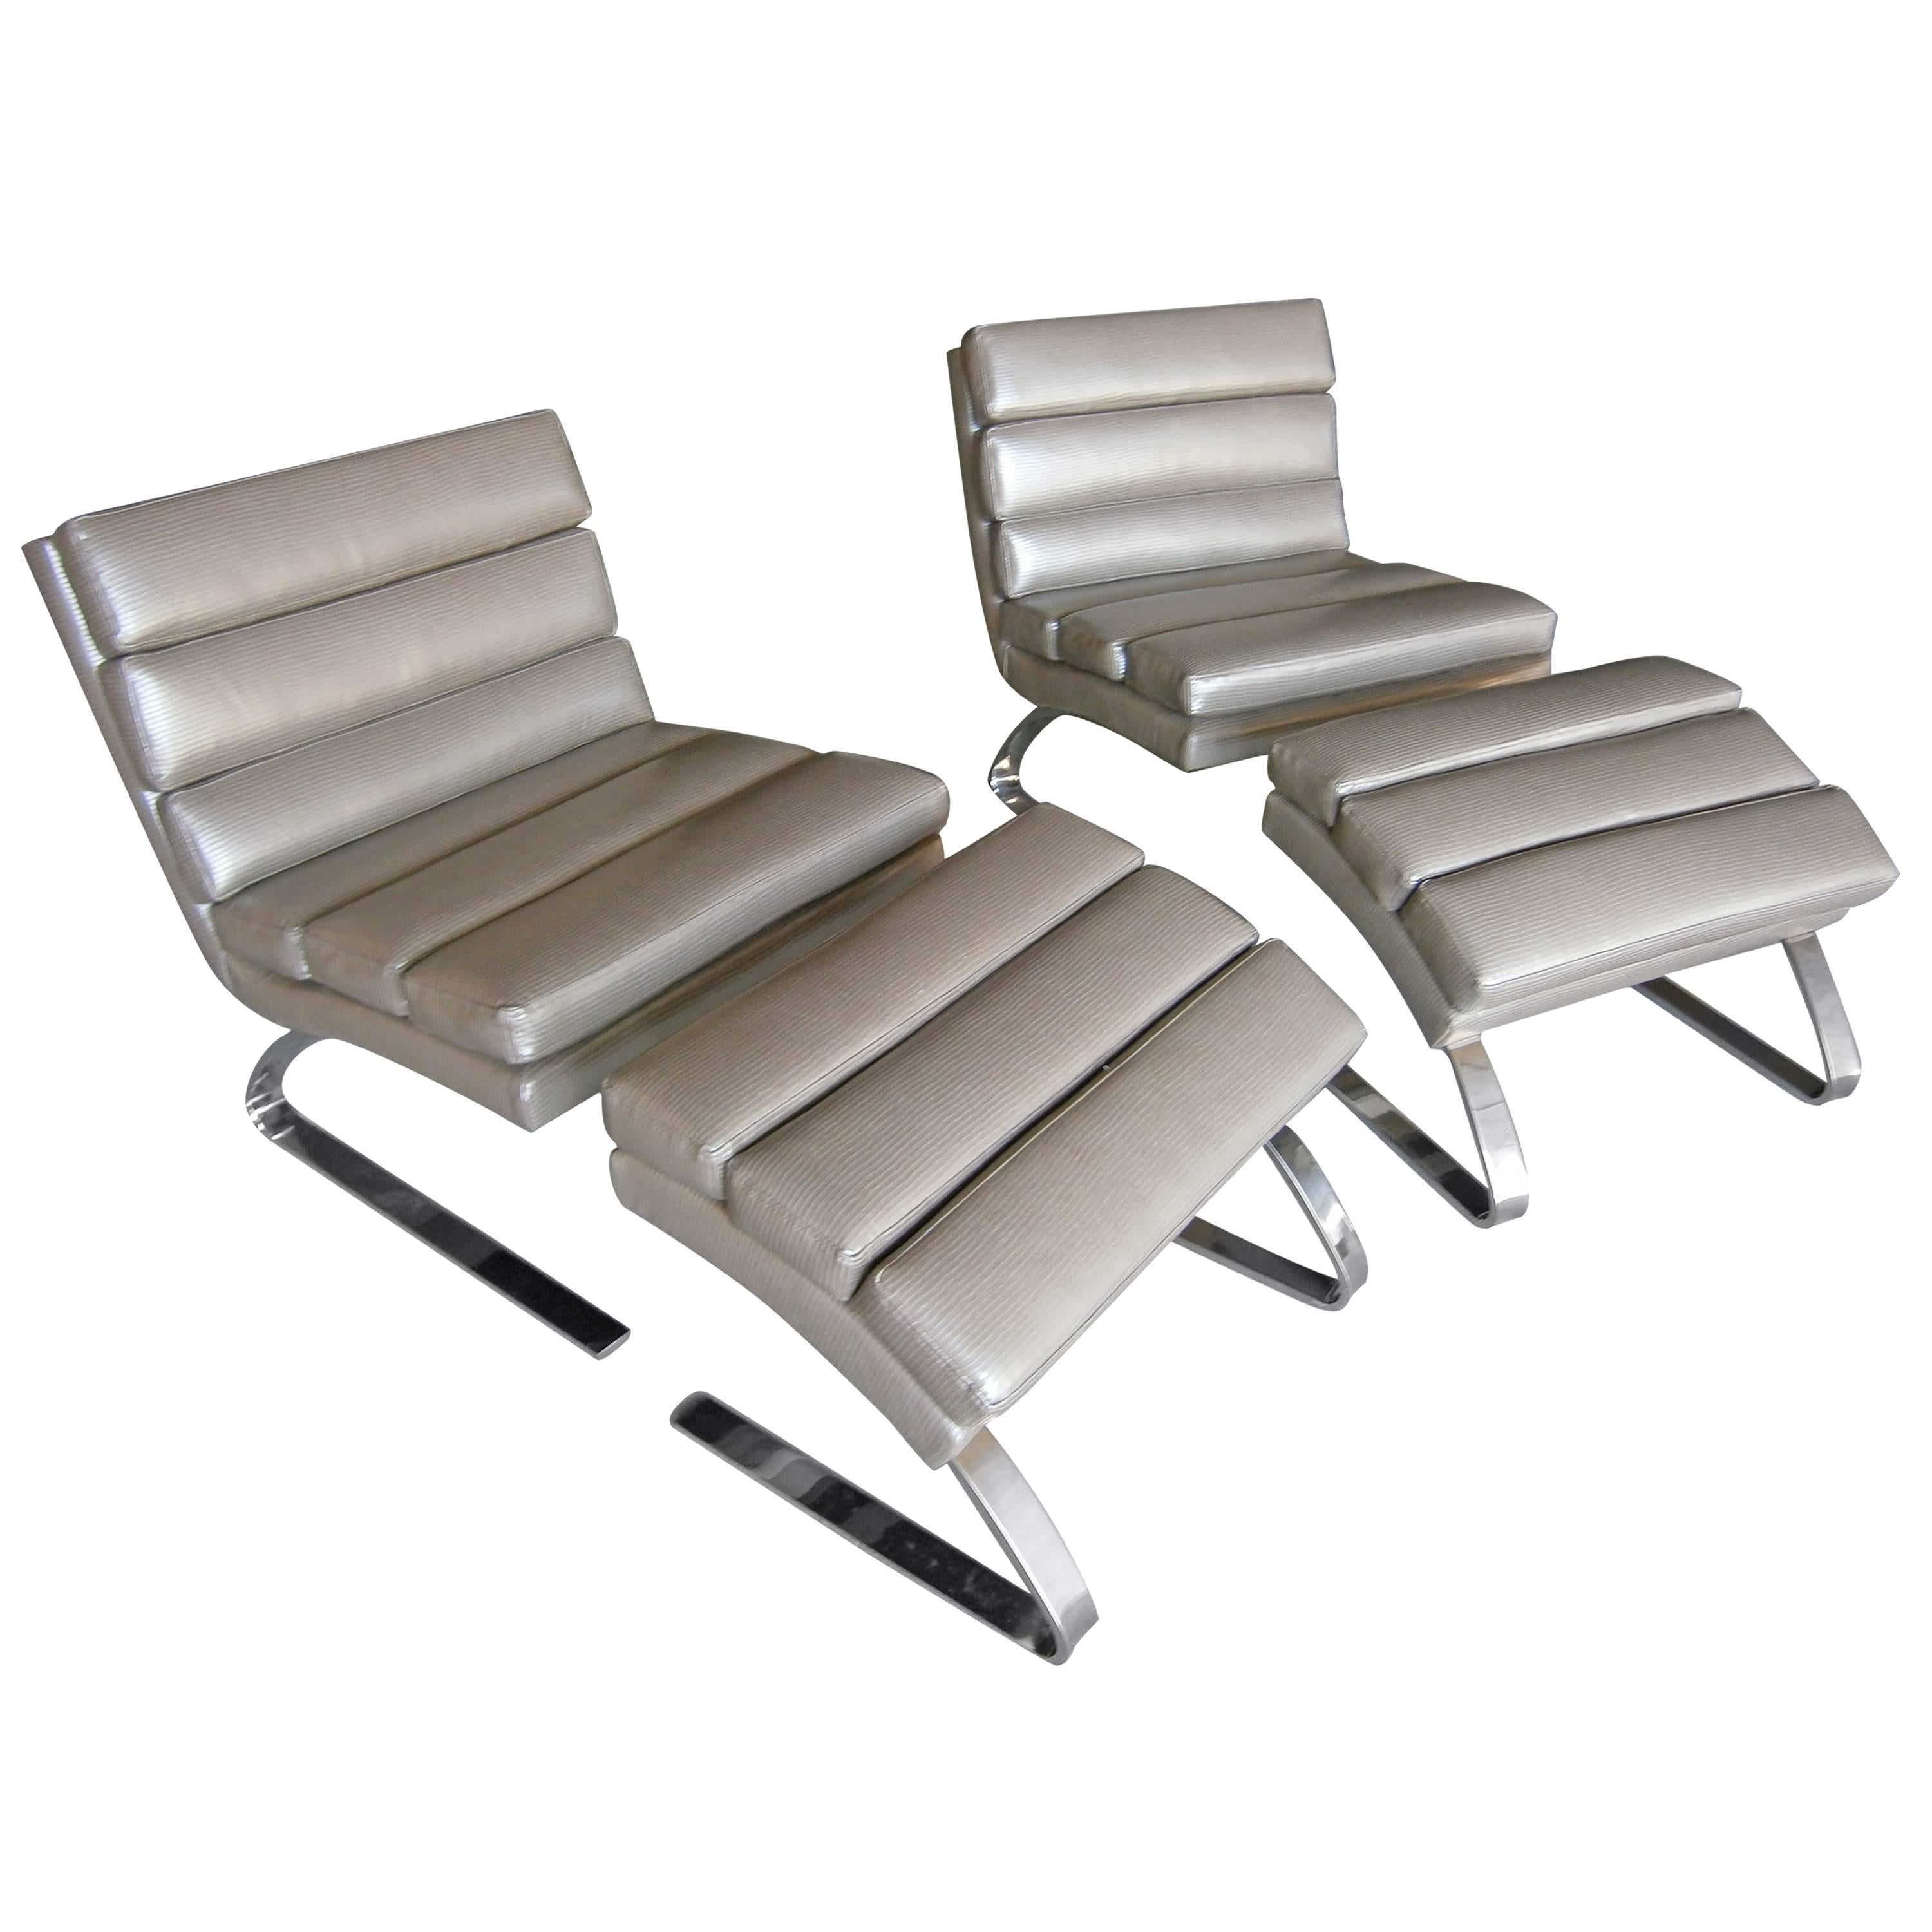 A Vintage Cantilevered Lounge Chair and Ottoman  C. 1990s